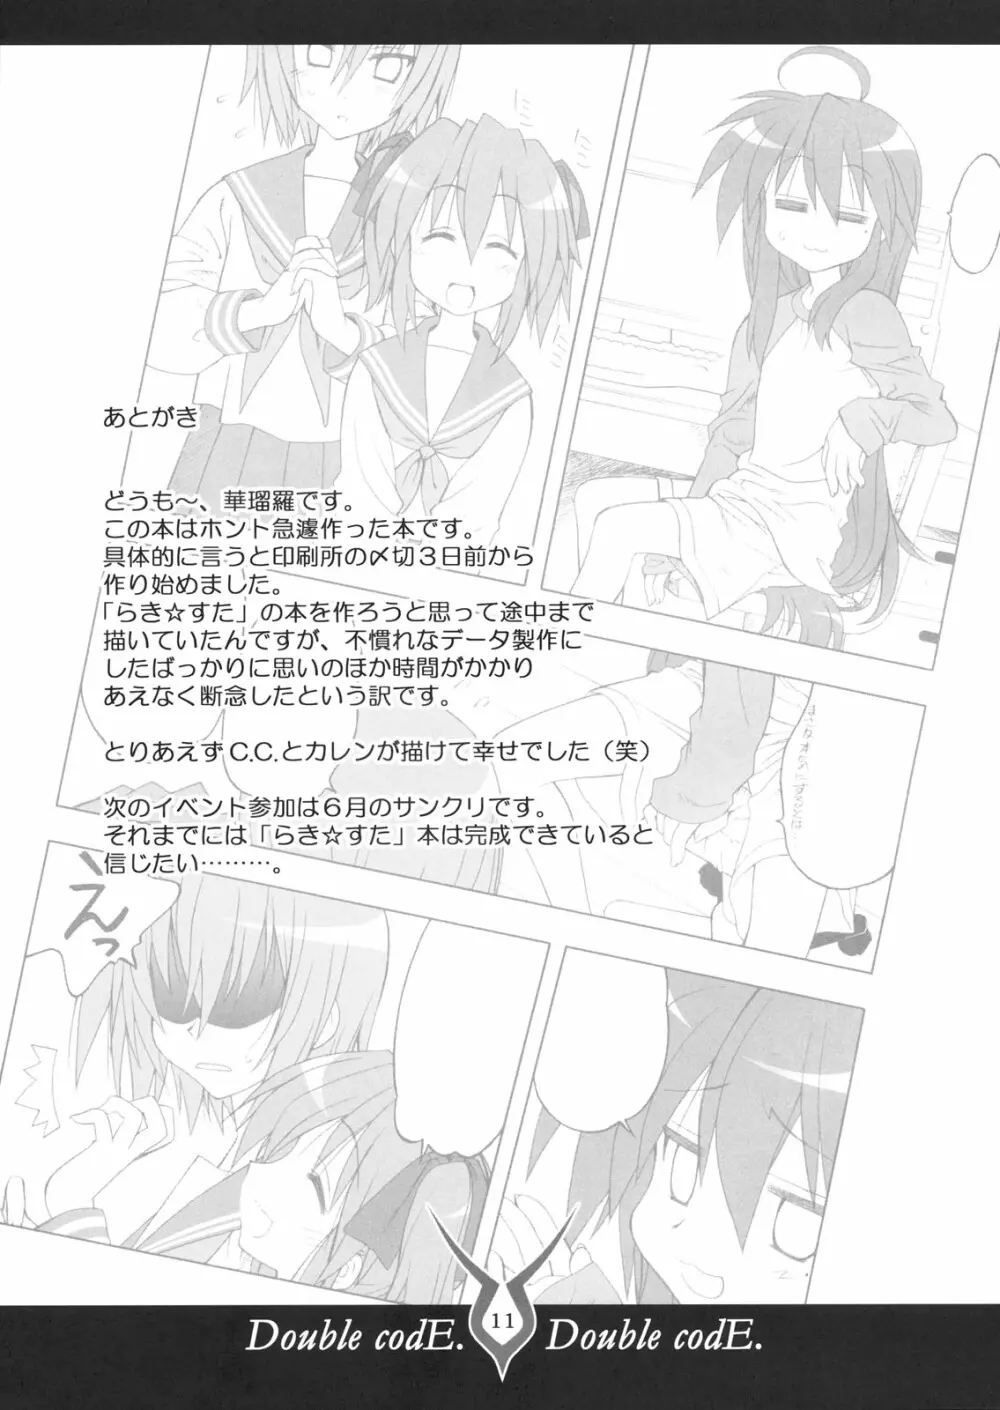 Double codE Page.10